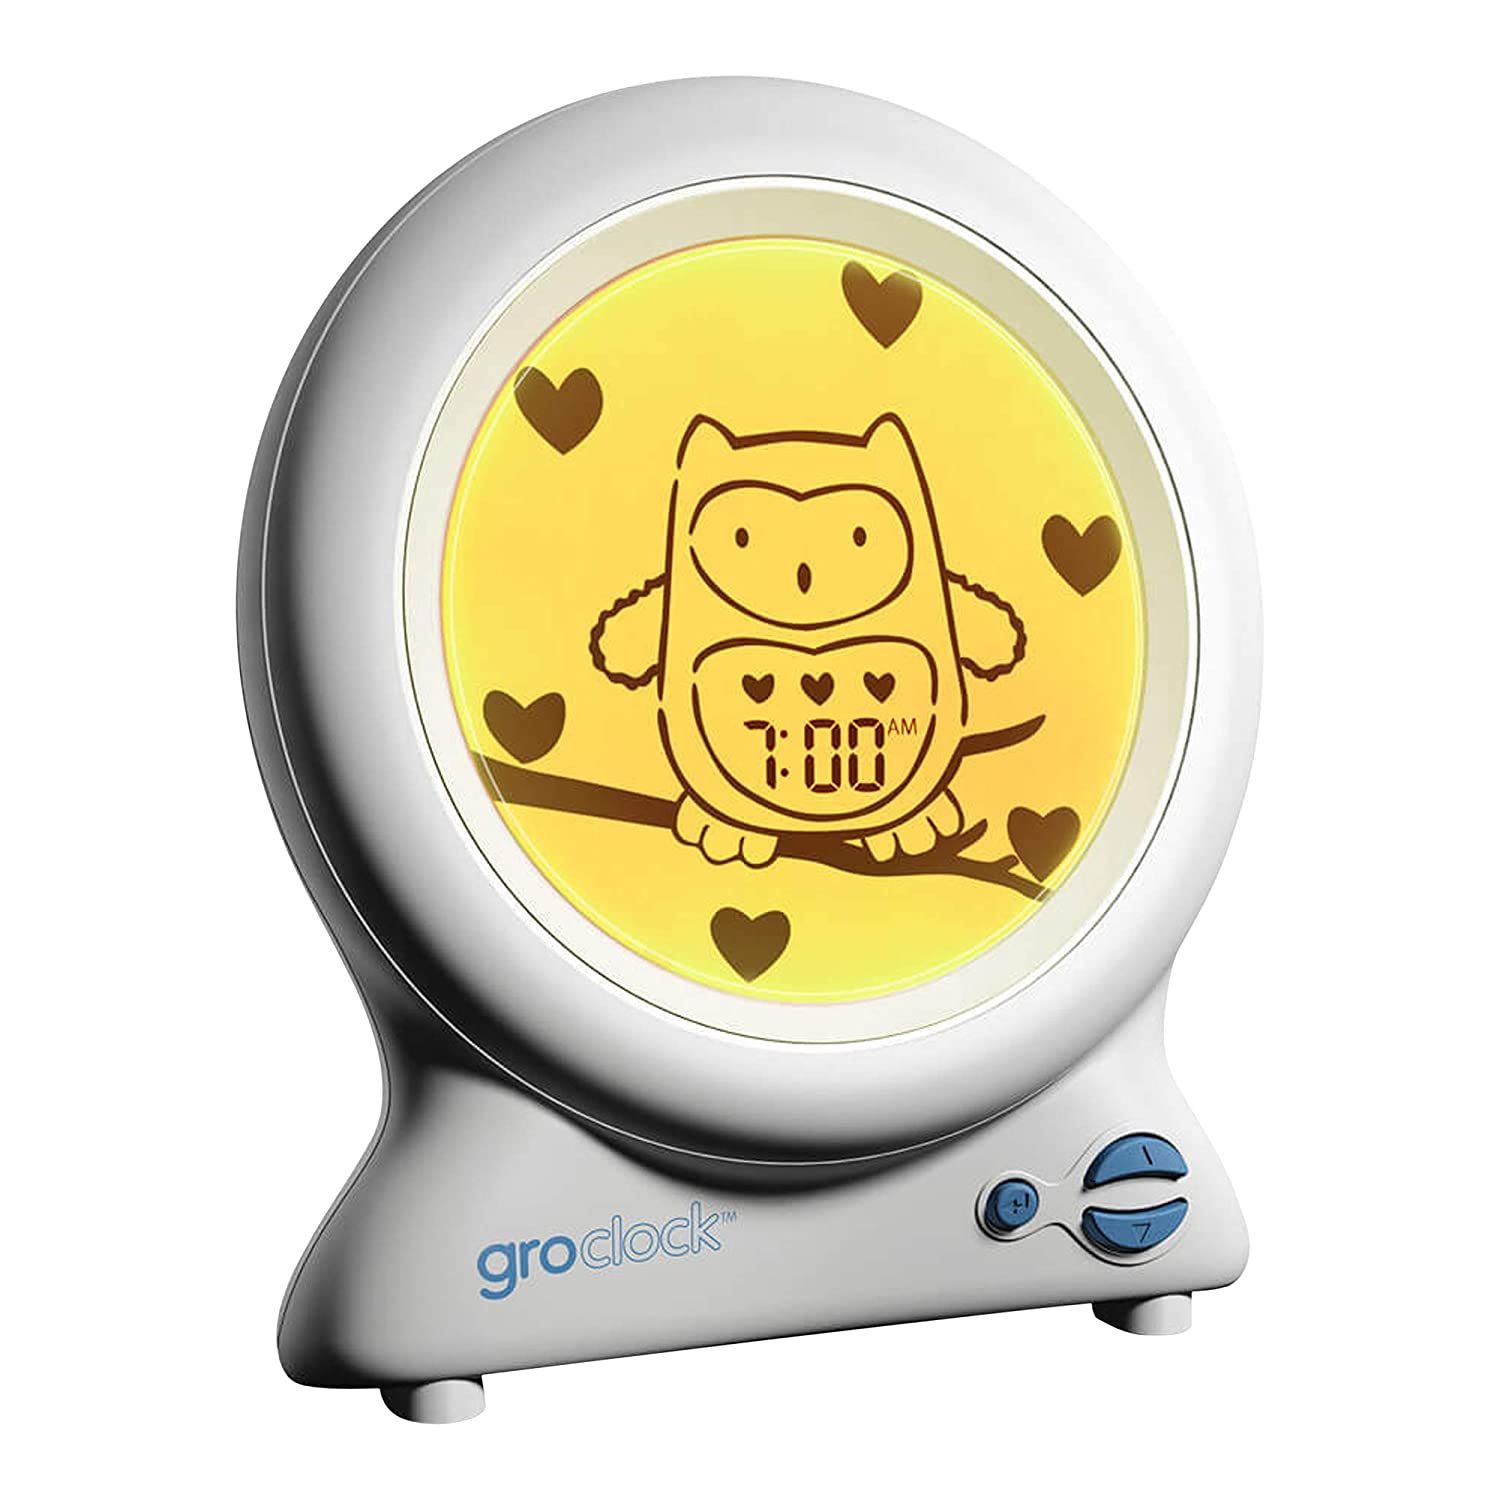 Tommee Tippee Groclock Toddler Clock and Sleep Trainer Alarm Clock and Night Light with USB Port